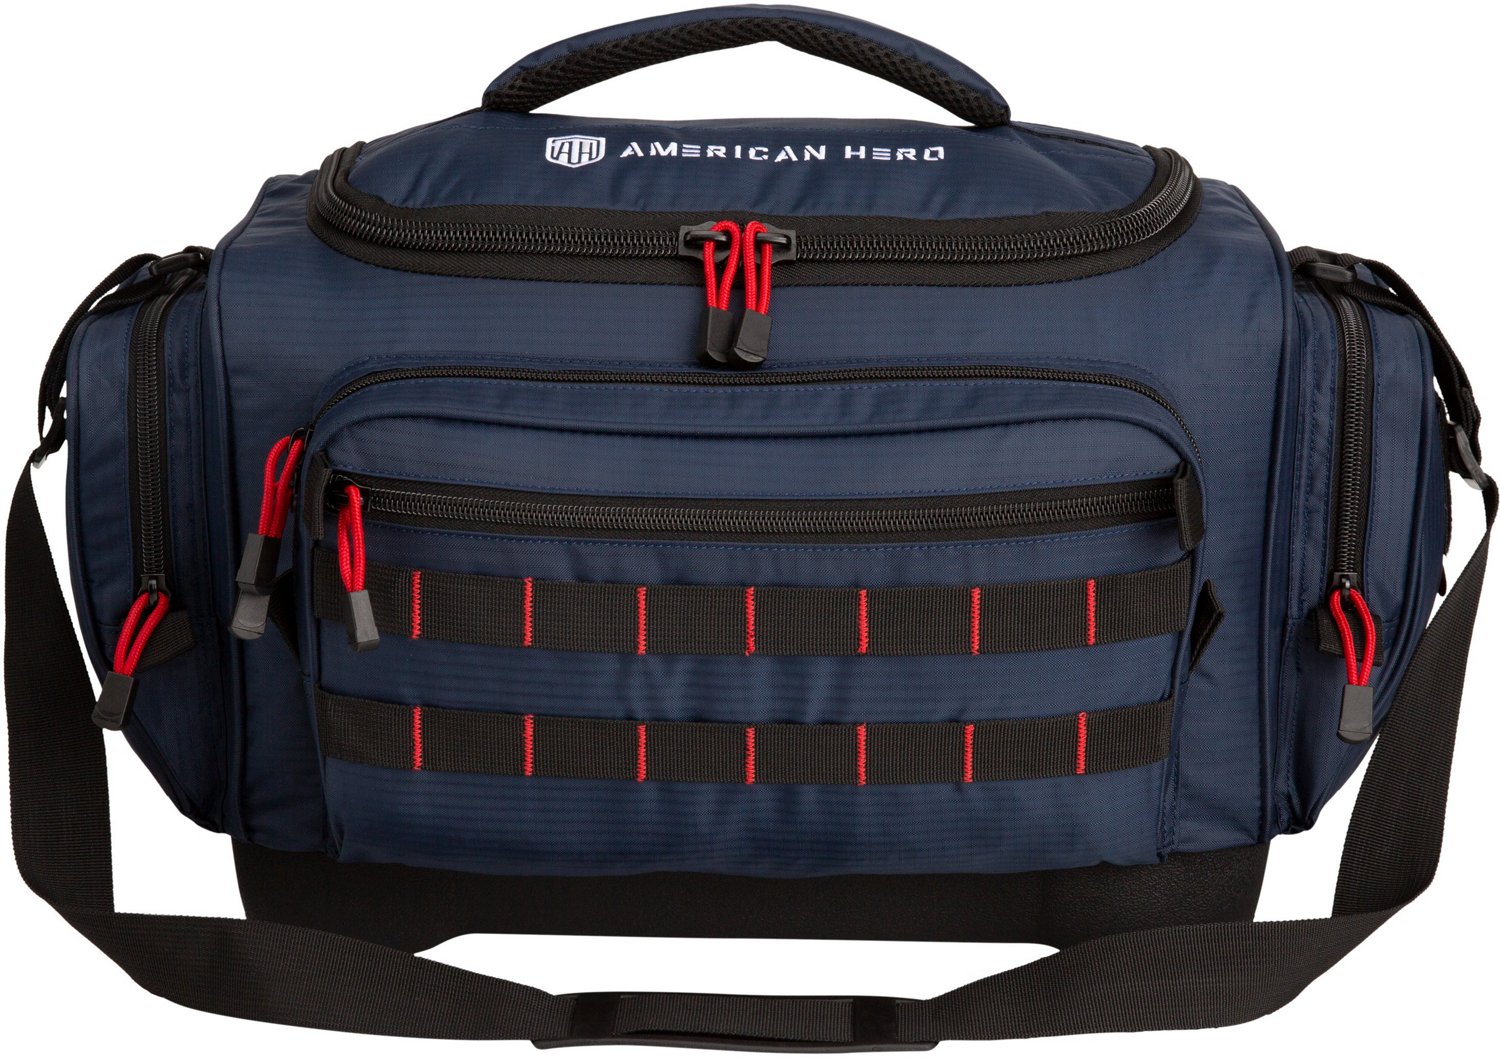 Academy Sports + Outdoors Lew's American Hero Tackle Bag